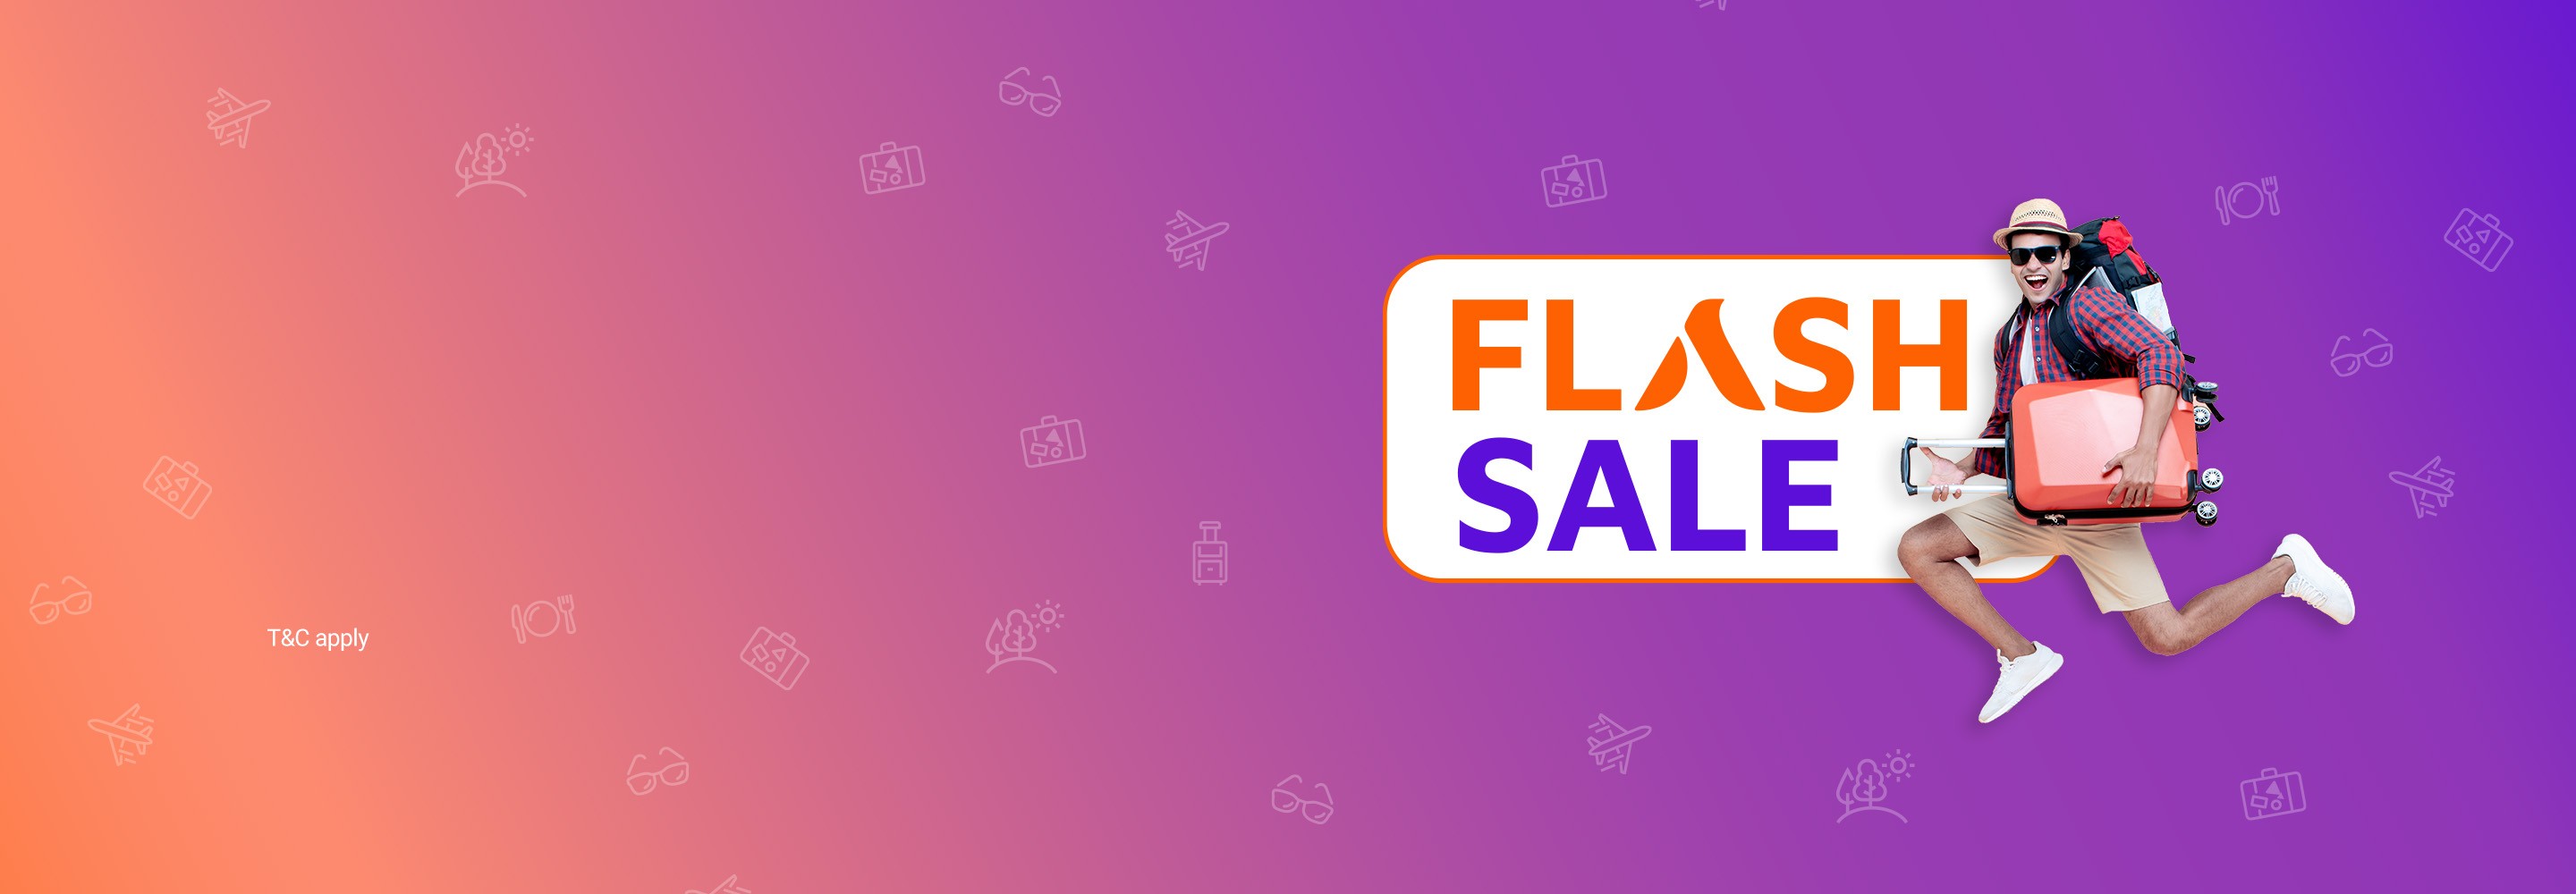 Flash Sale Up to 15% off on flights. Use code: FLASH15 Sign up to avail this offer